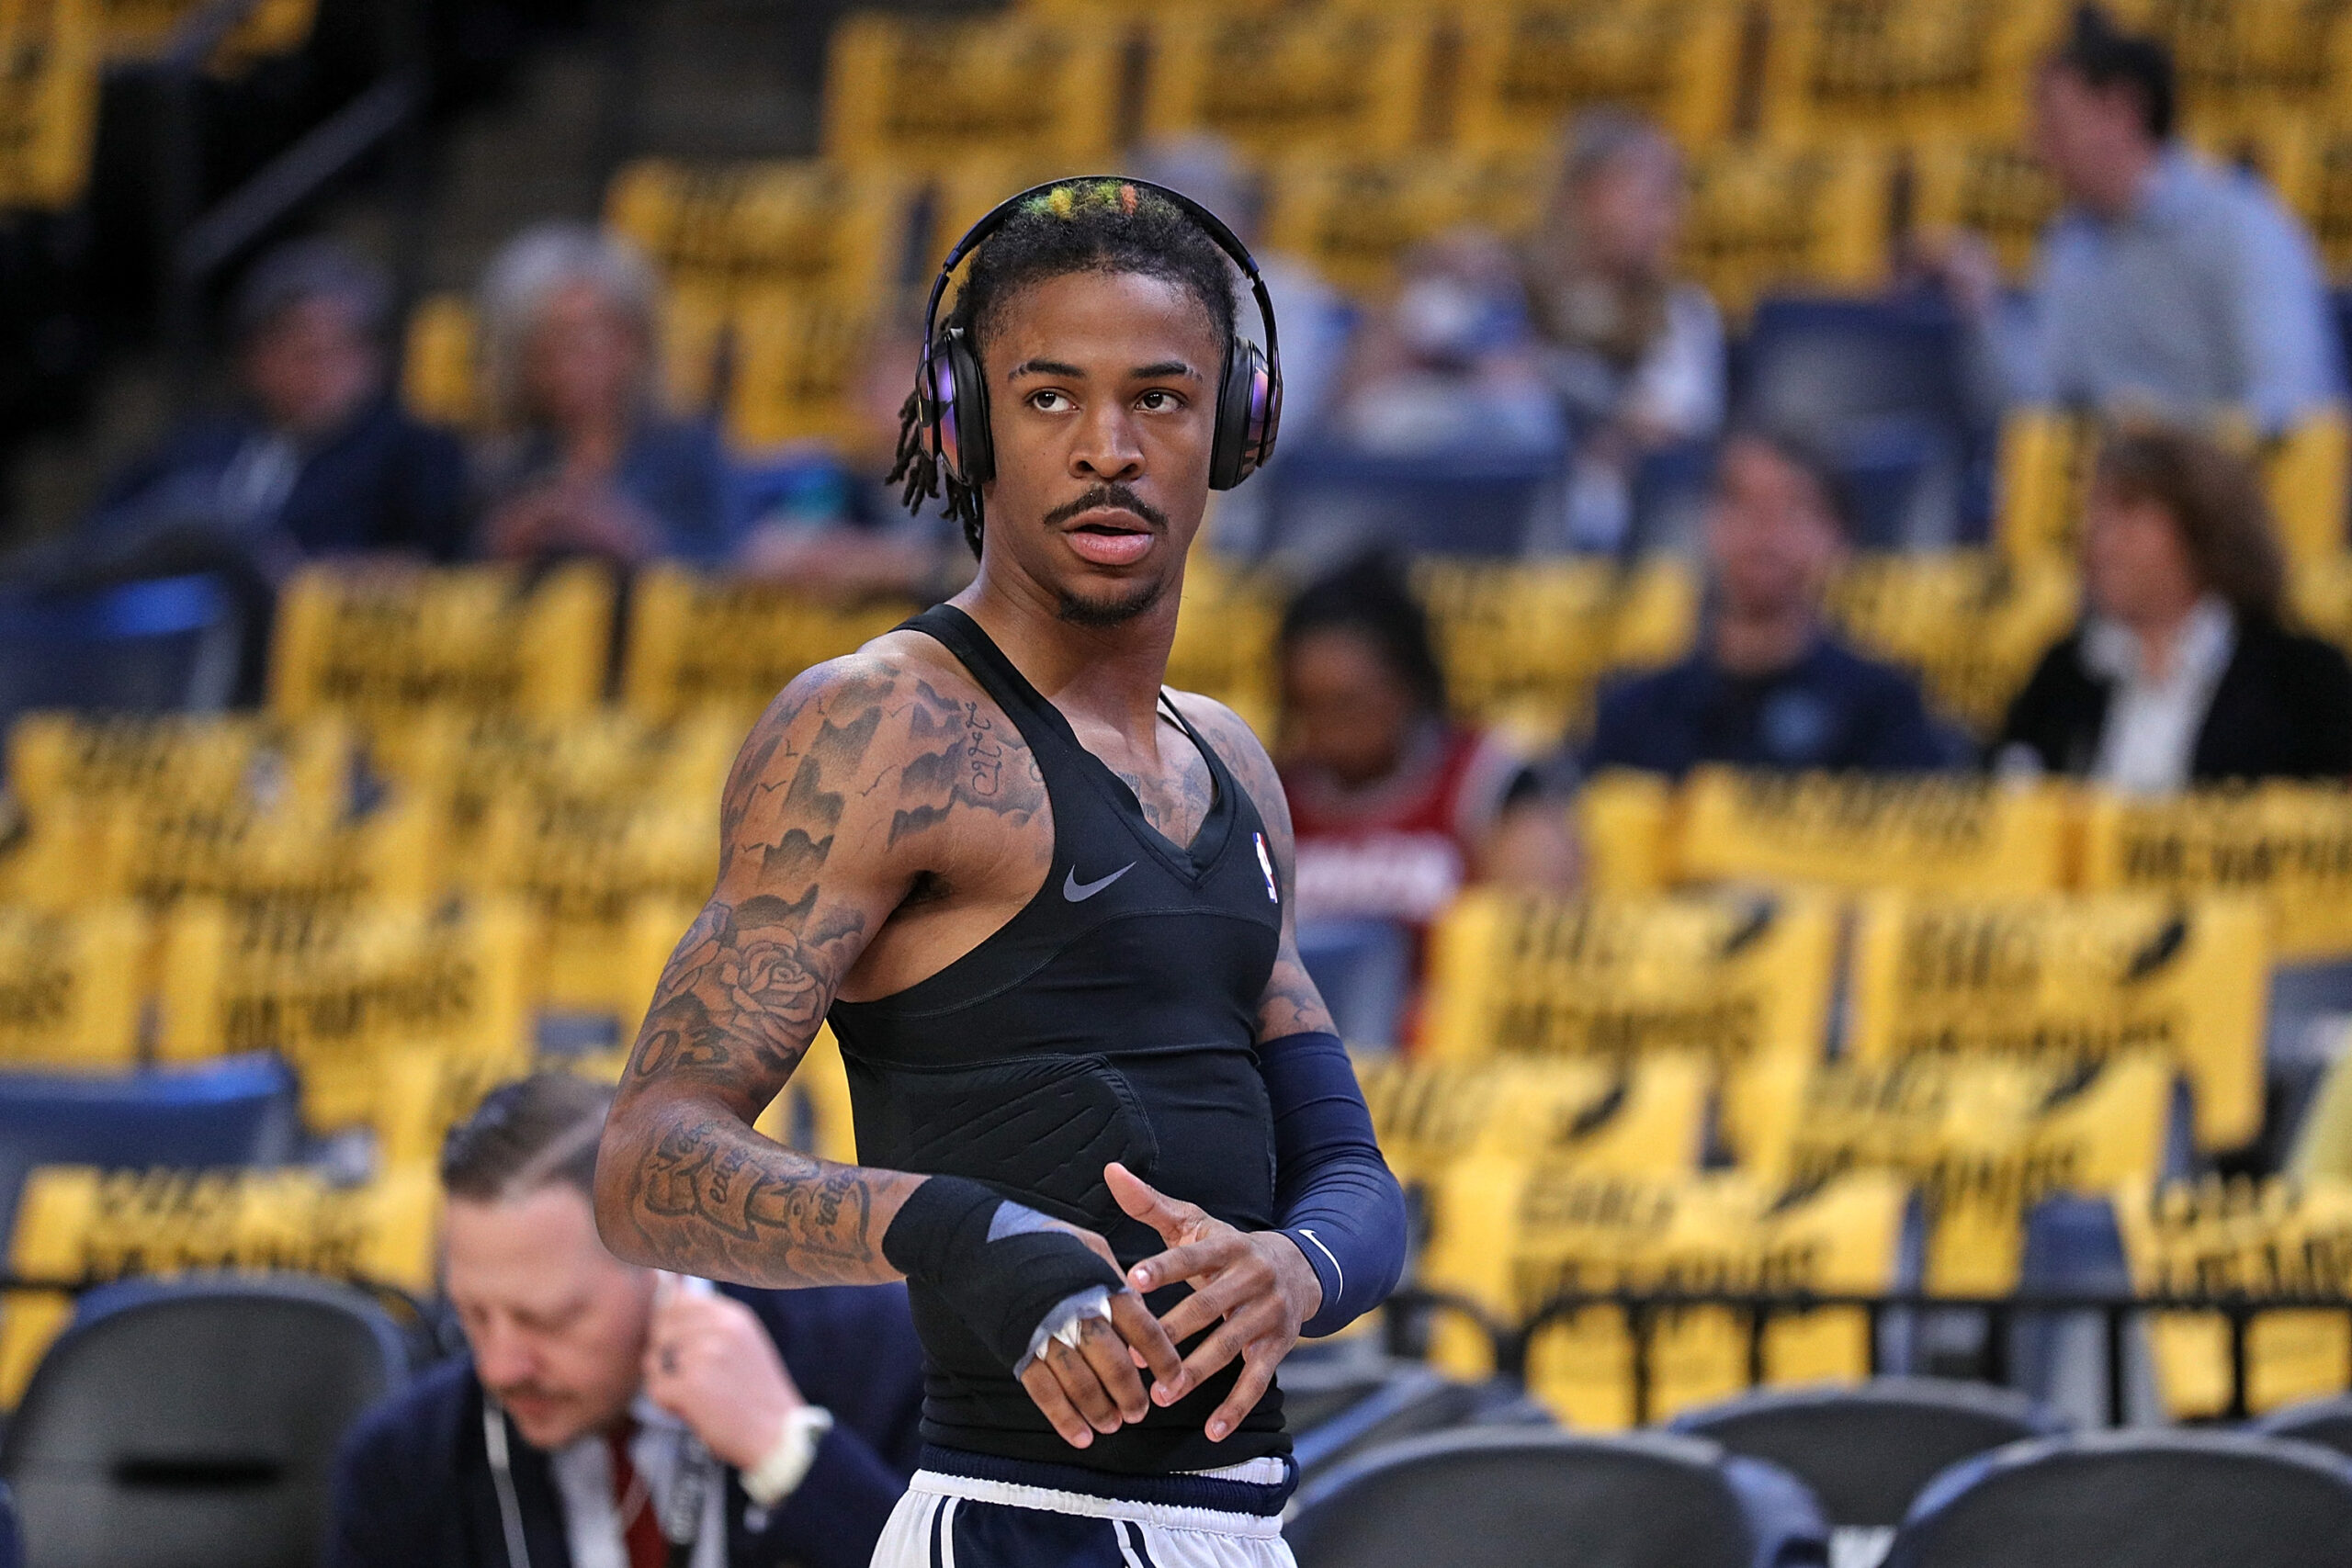 Memphis Grizzlies tried to address Ja Morant's actions before gun